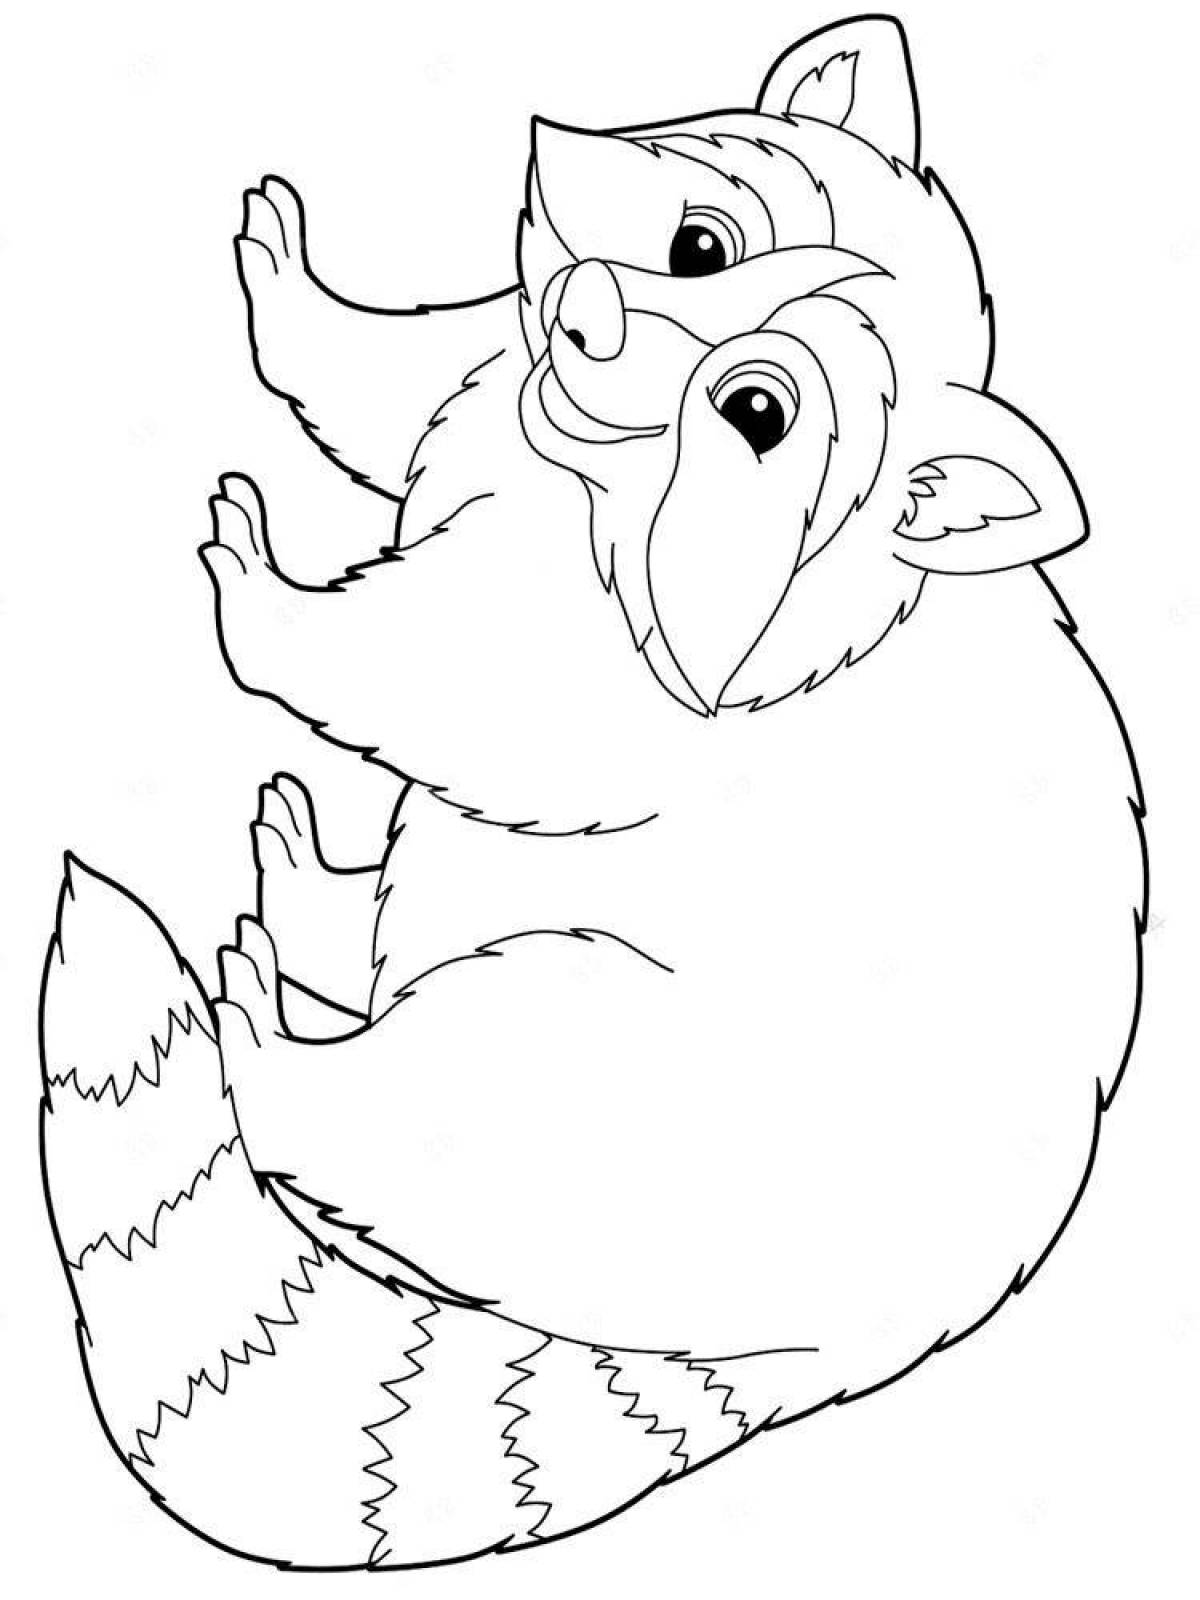 Color-bright raccoon coloring page for kids